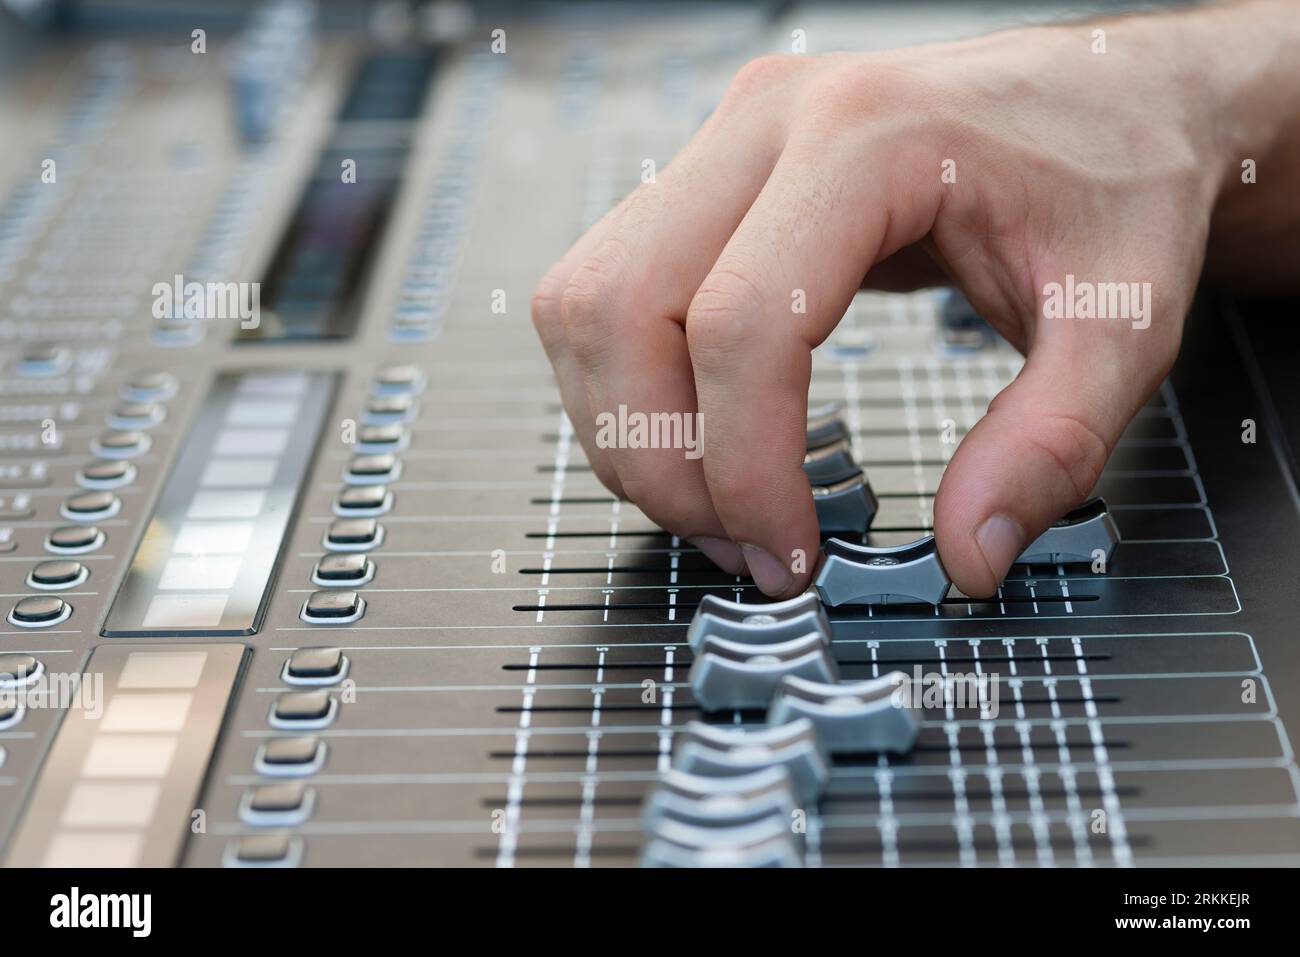 Sound Engineer Operating Professional Sound Mixer at Live Concert, Hand. Stock Photo